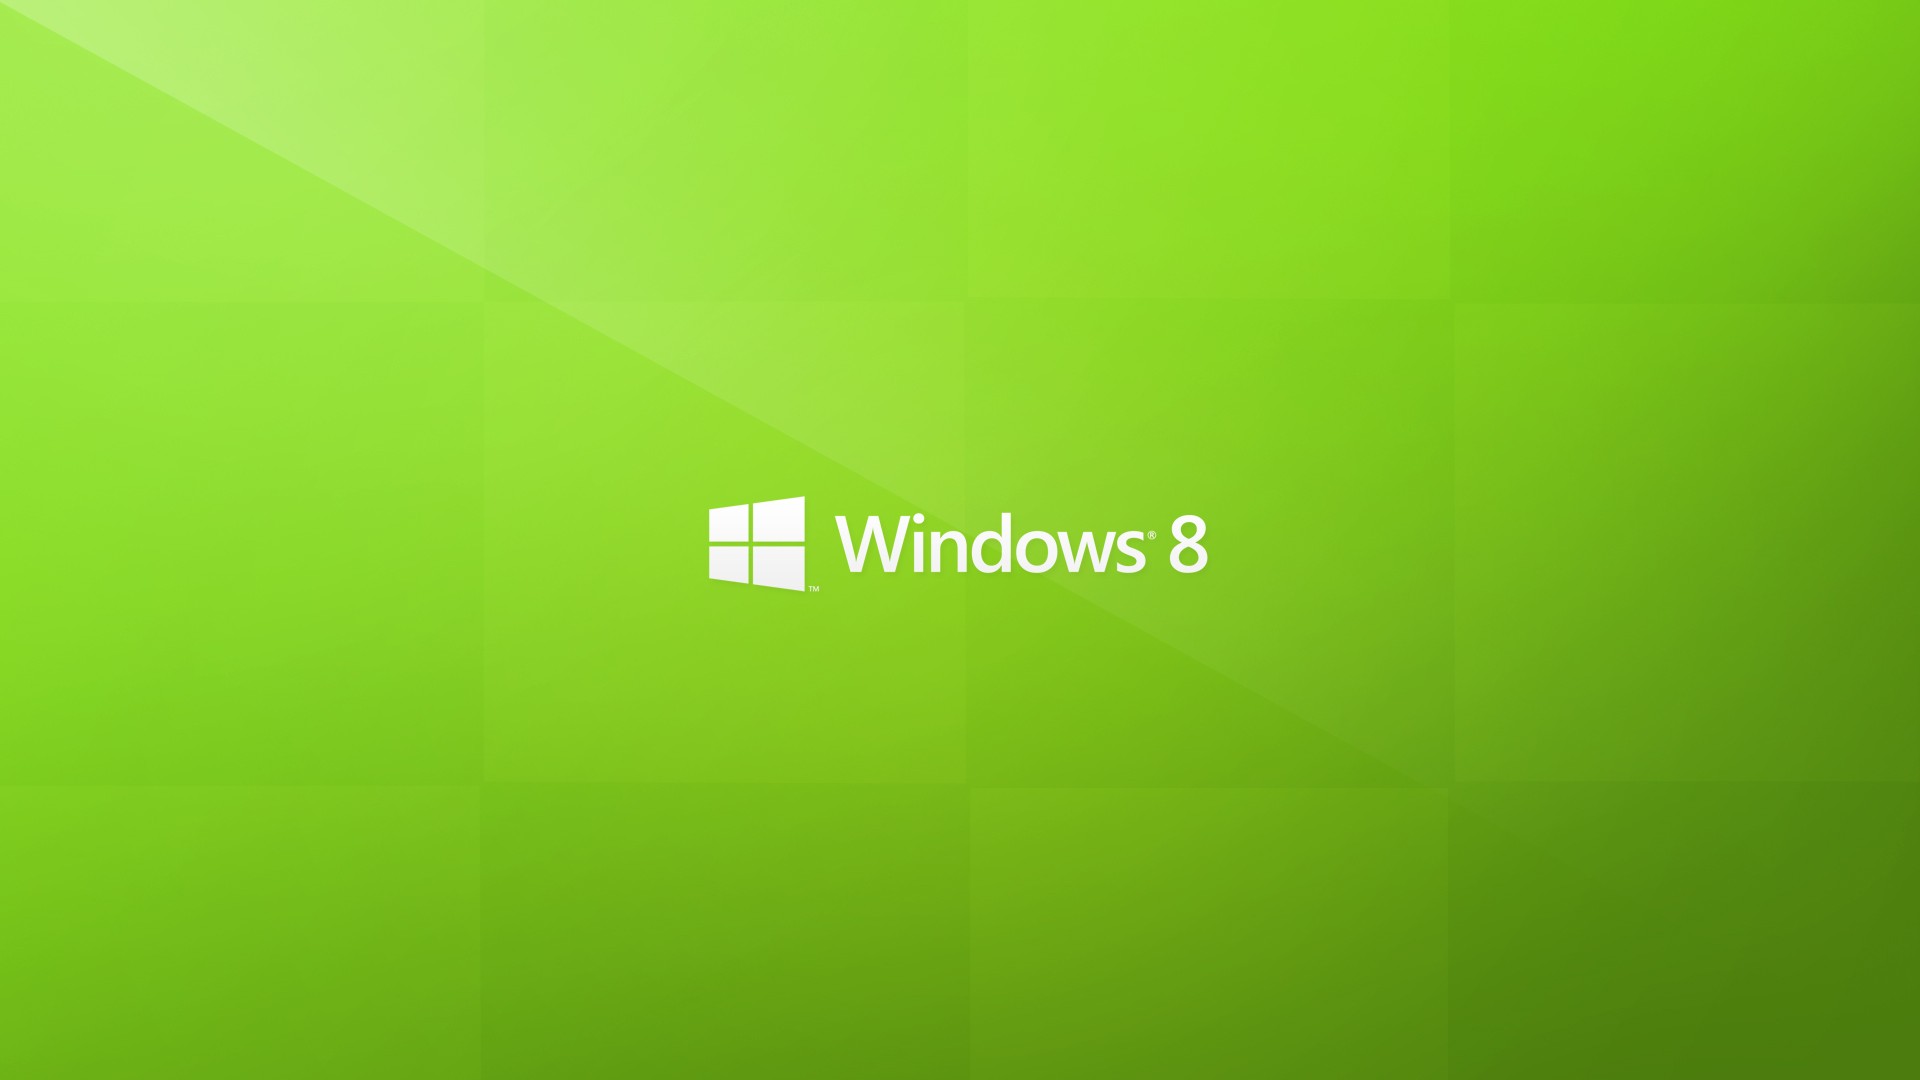 rate select rating give lime green windows 8 1 5 give lime